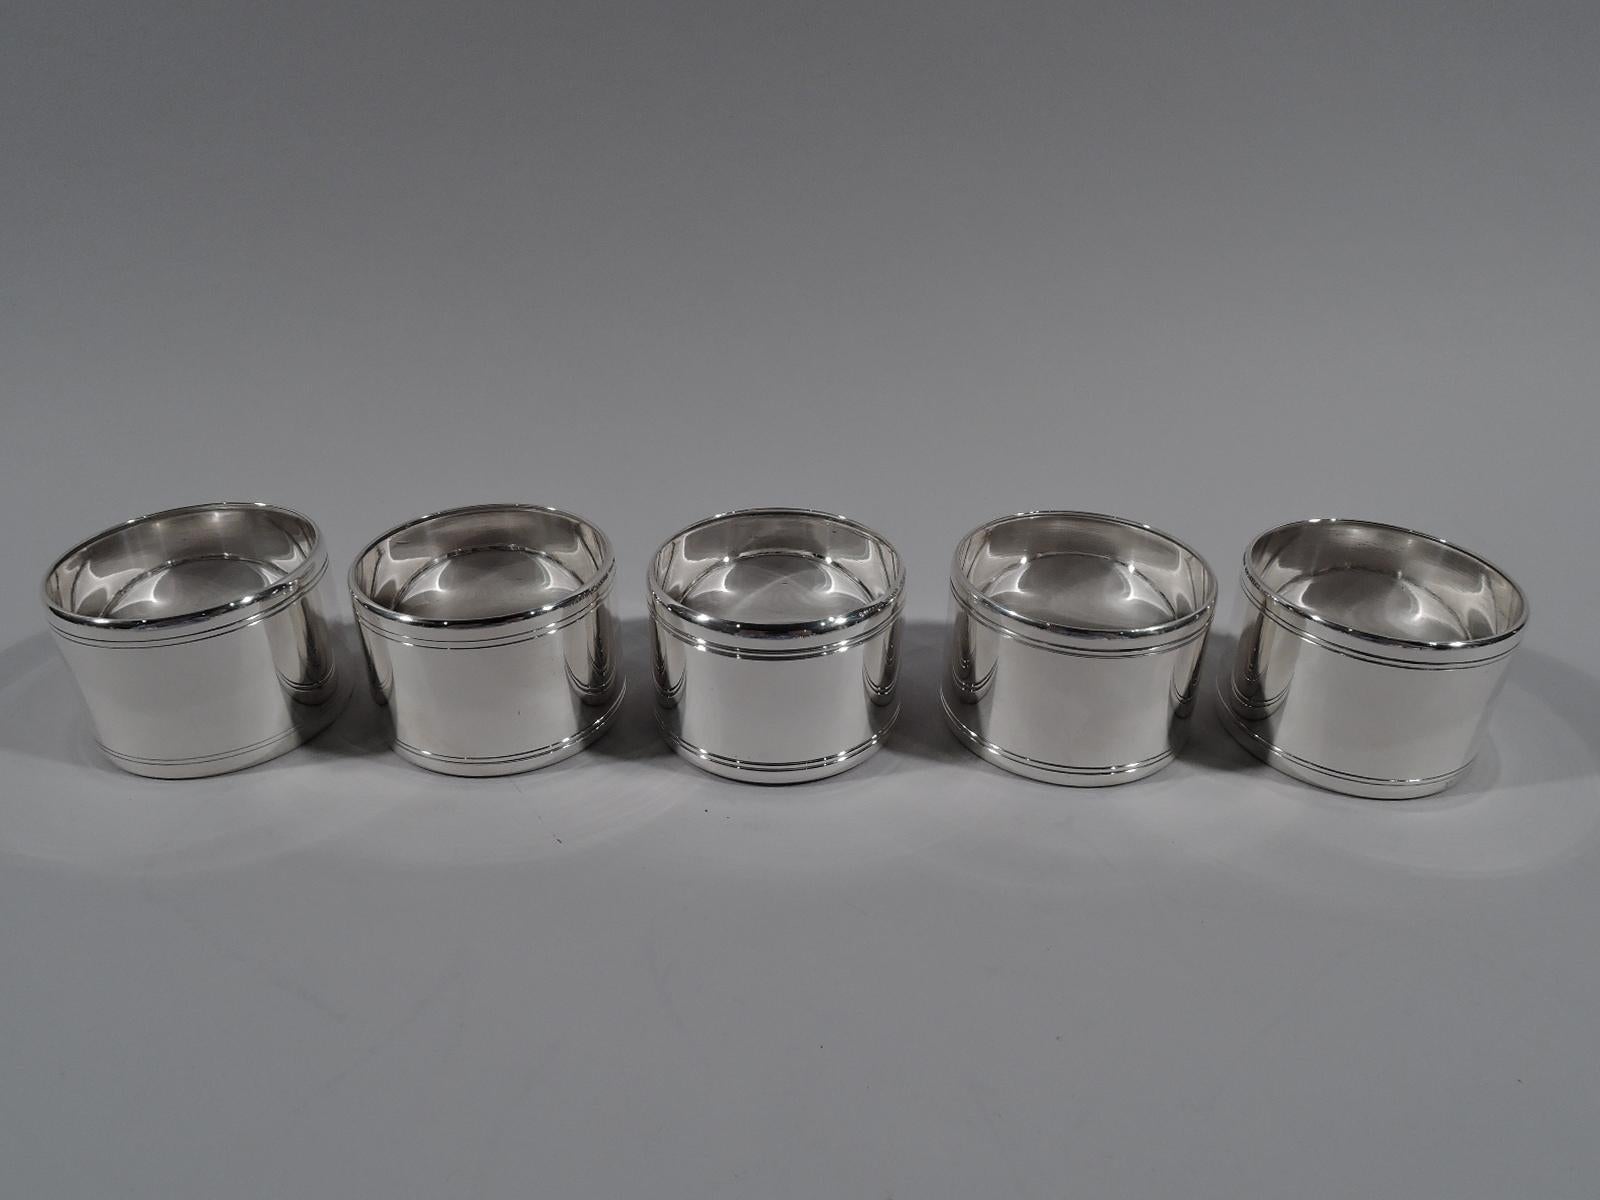 Set of 10 Mid-Century Modern sterling silver napkin rings. Made by Tiffany & Co. in New York. Each: Plain with engraved double bands at top and bottom. Marked “Tiffany & Co. Makers Sterling”. Total weight: 18 troy ounces.